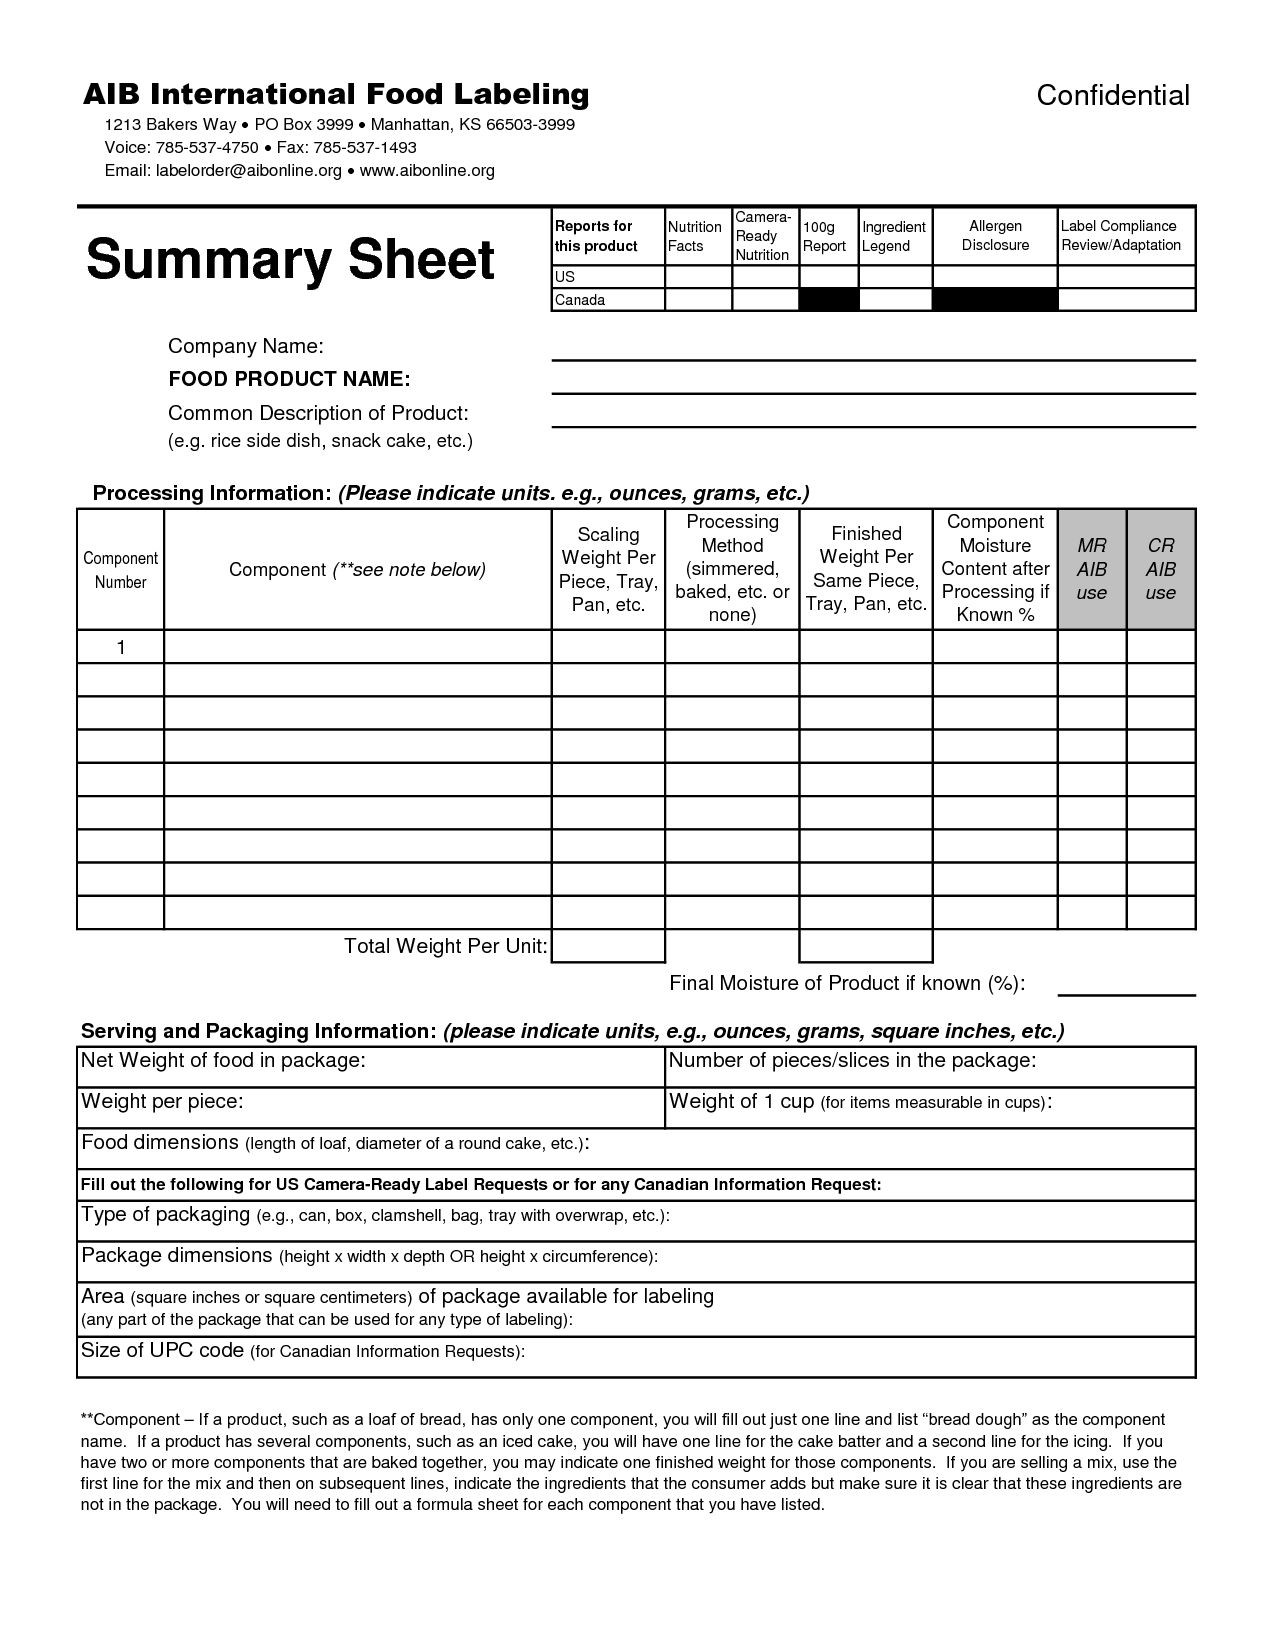 Nutrition Label Worksheet Answers Nutrition Label Worksheet Nscsd Answers Nutritionwalls